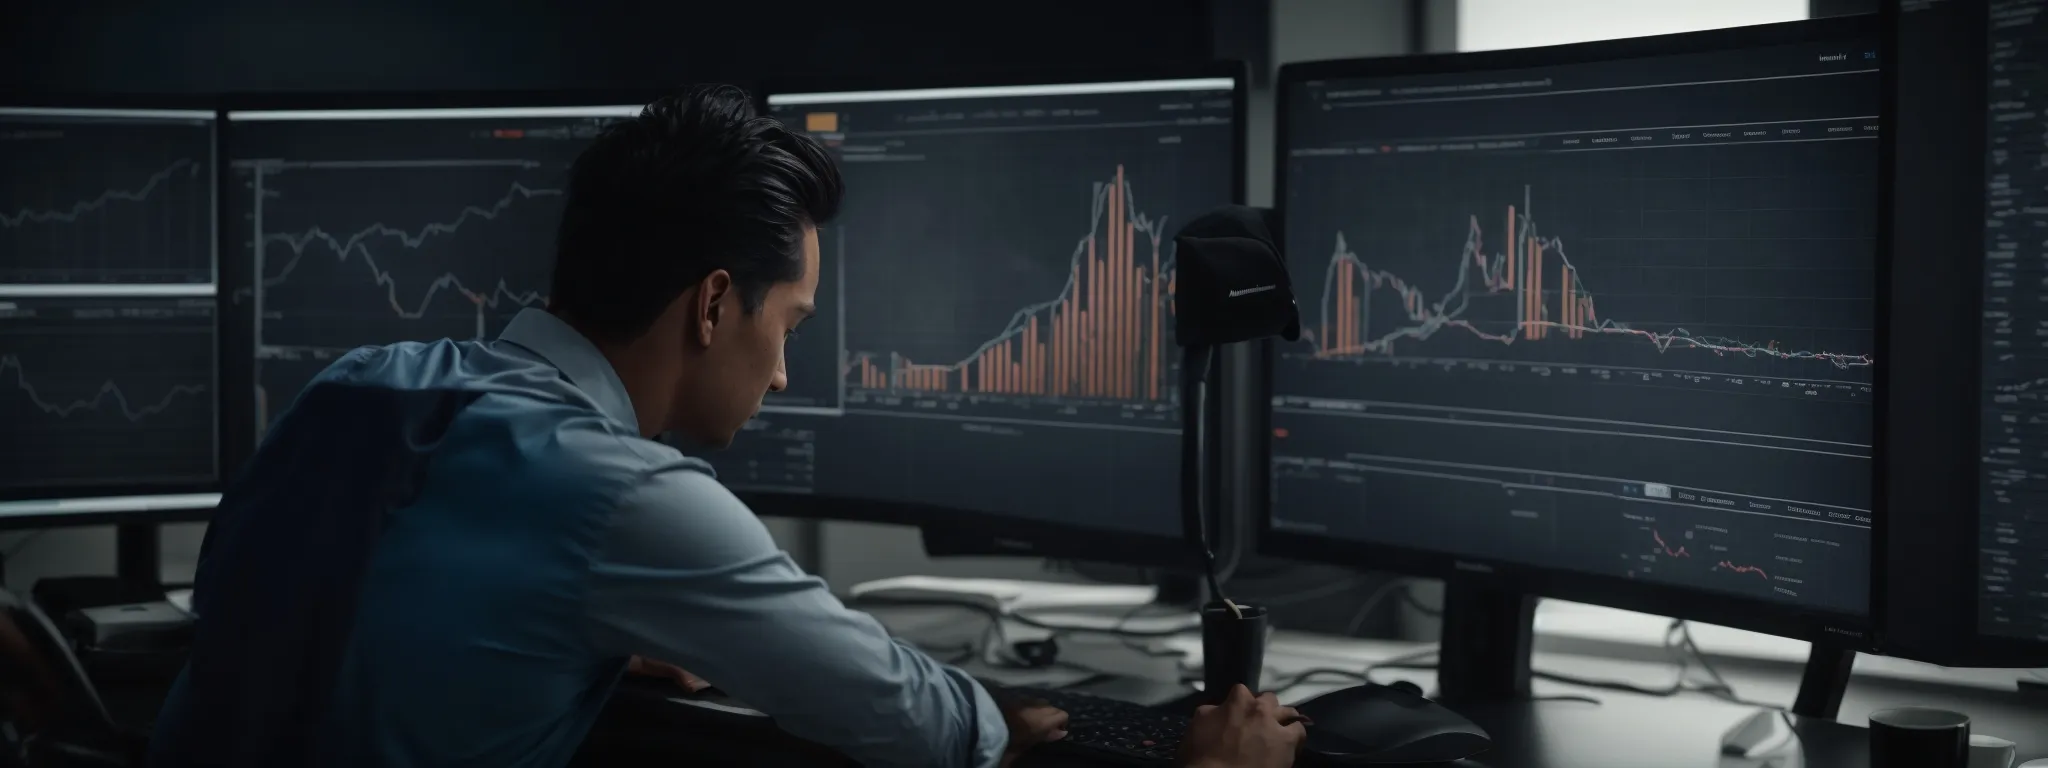 a focused individual analyzing charts and graphs on a large monitor that displays website data and seo metrics.